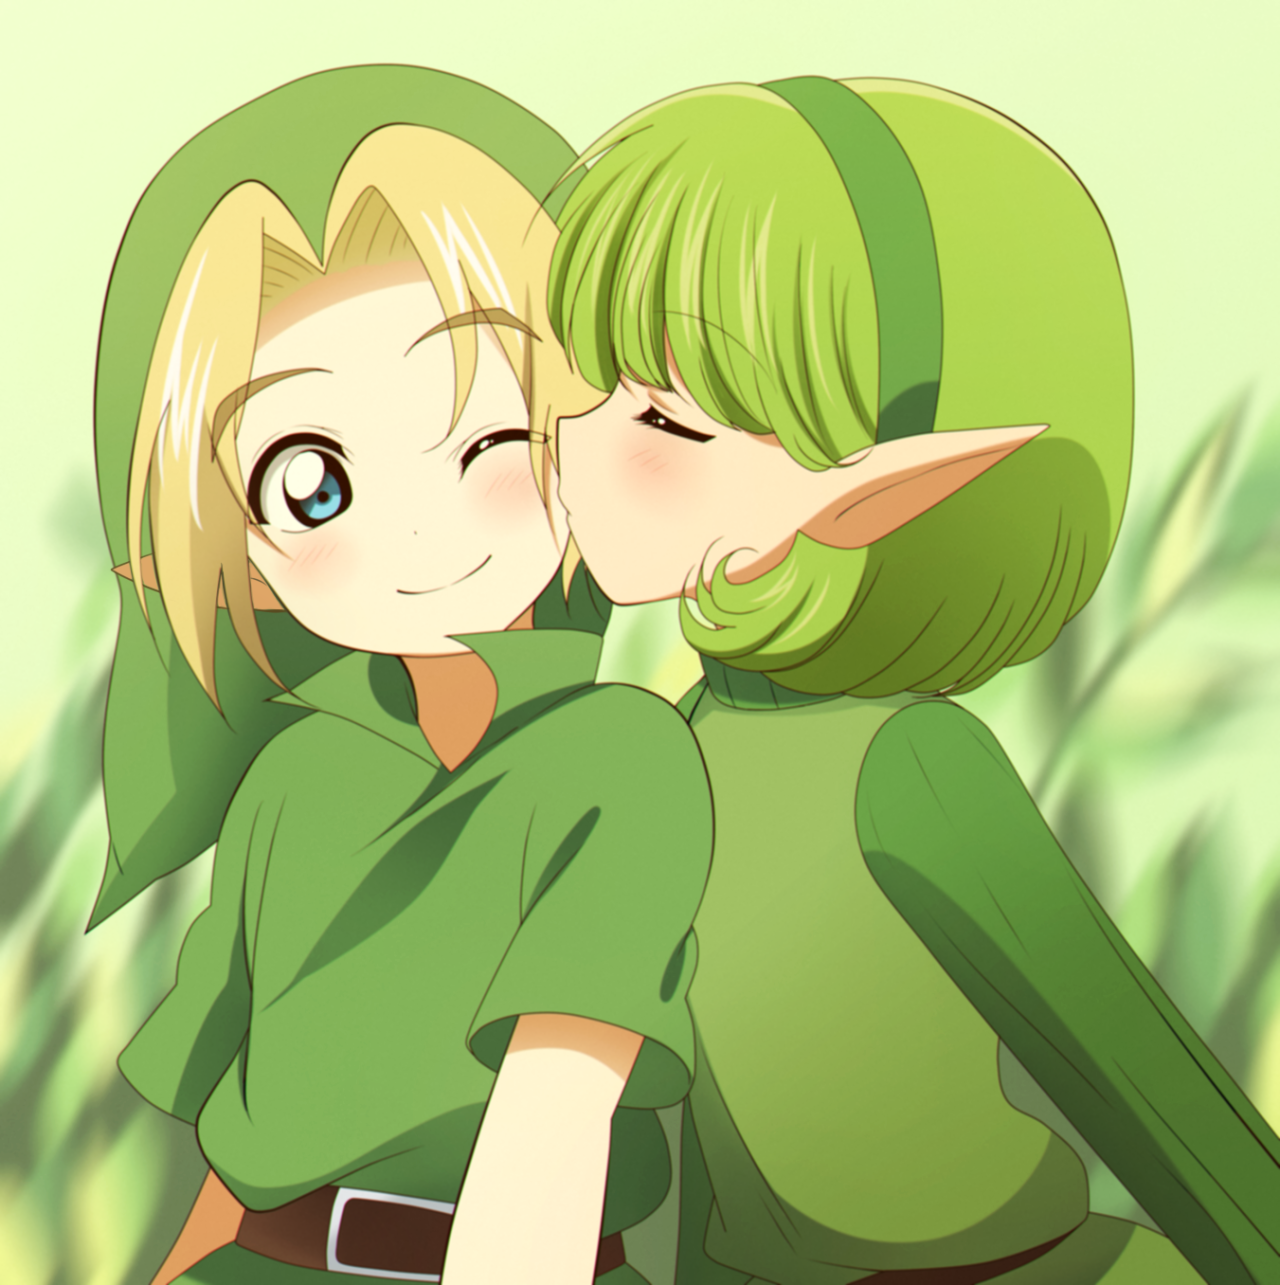 Link and saria